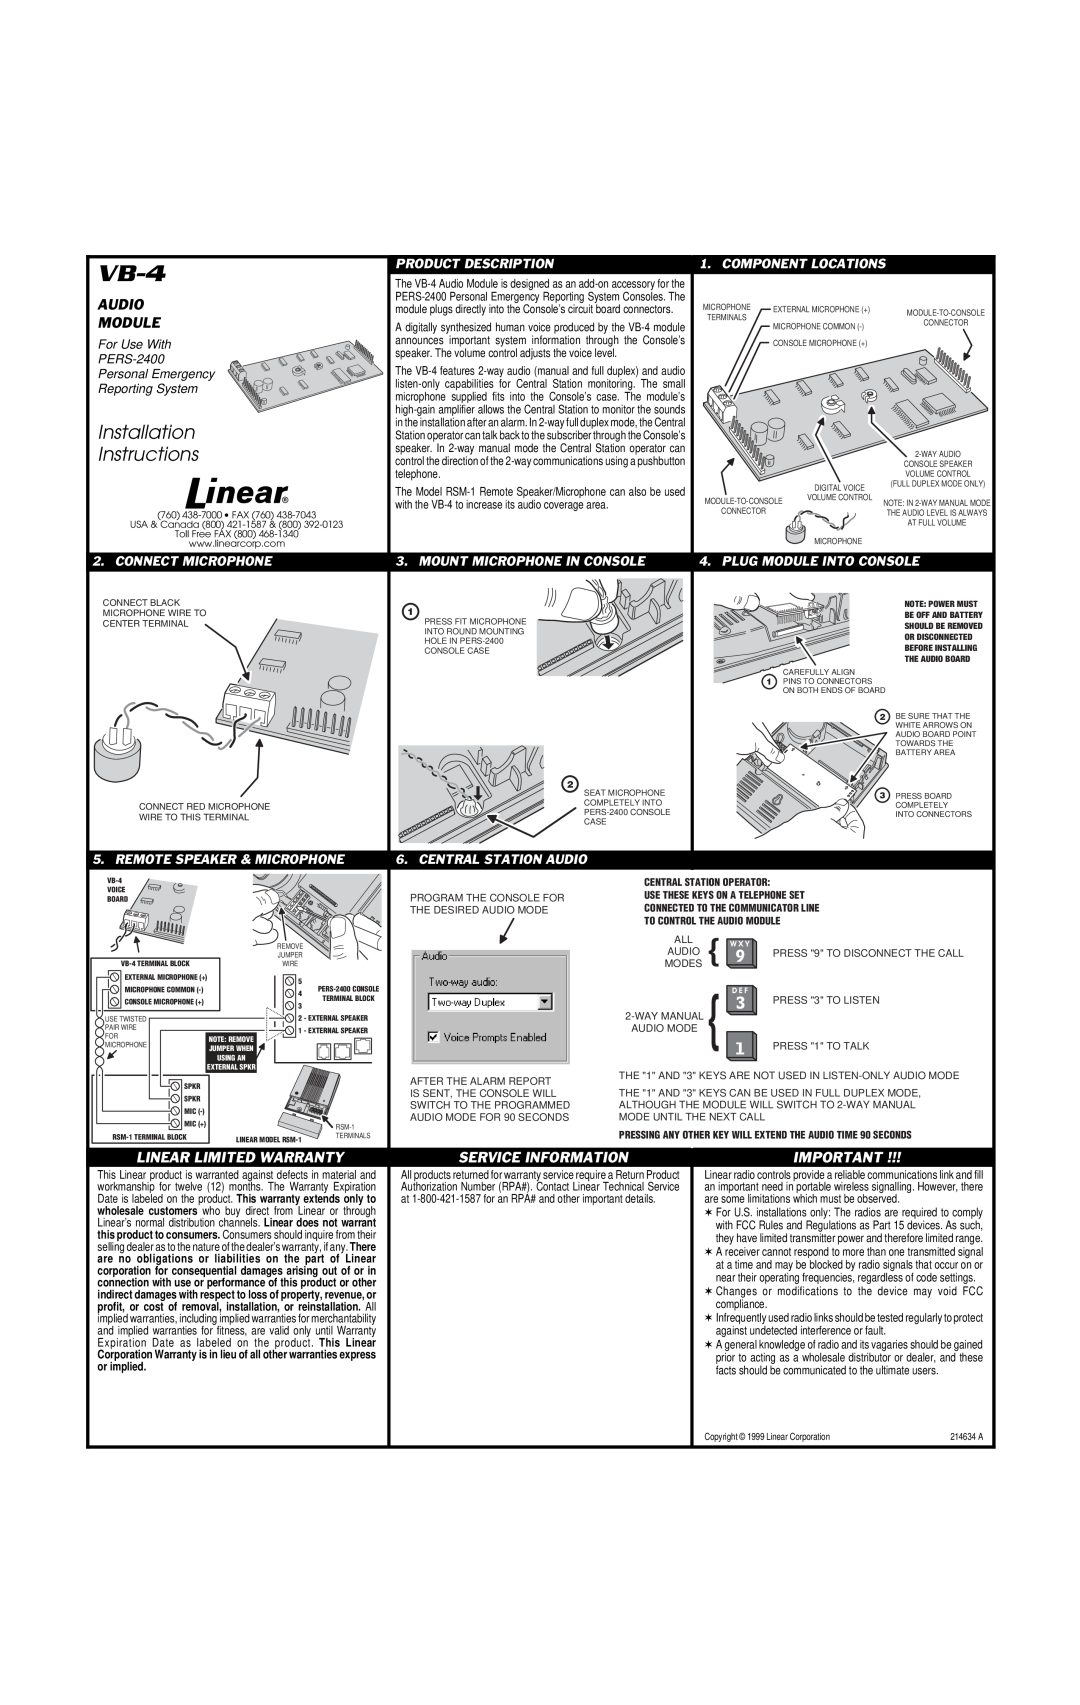 Linear VB-4 installation instructions Installation Instructions, Audio Module, Linear Limited Warranty, Connect Microphone 